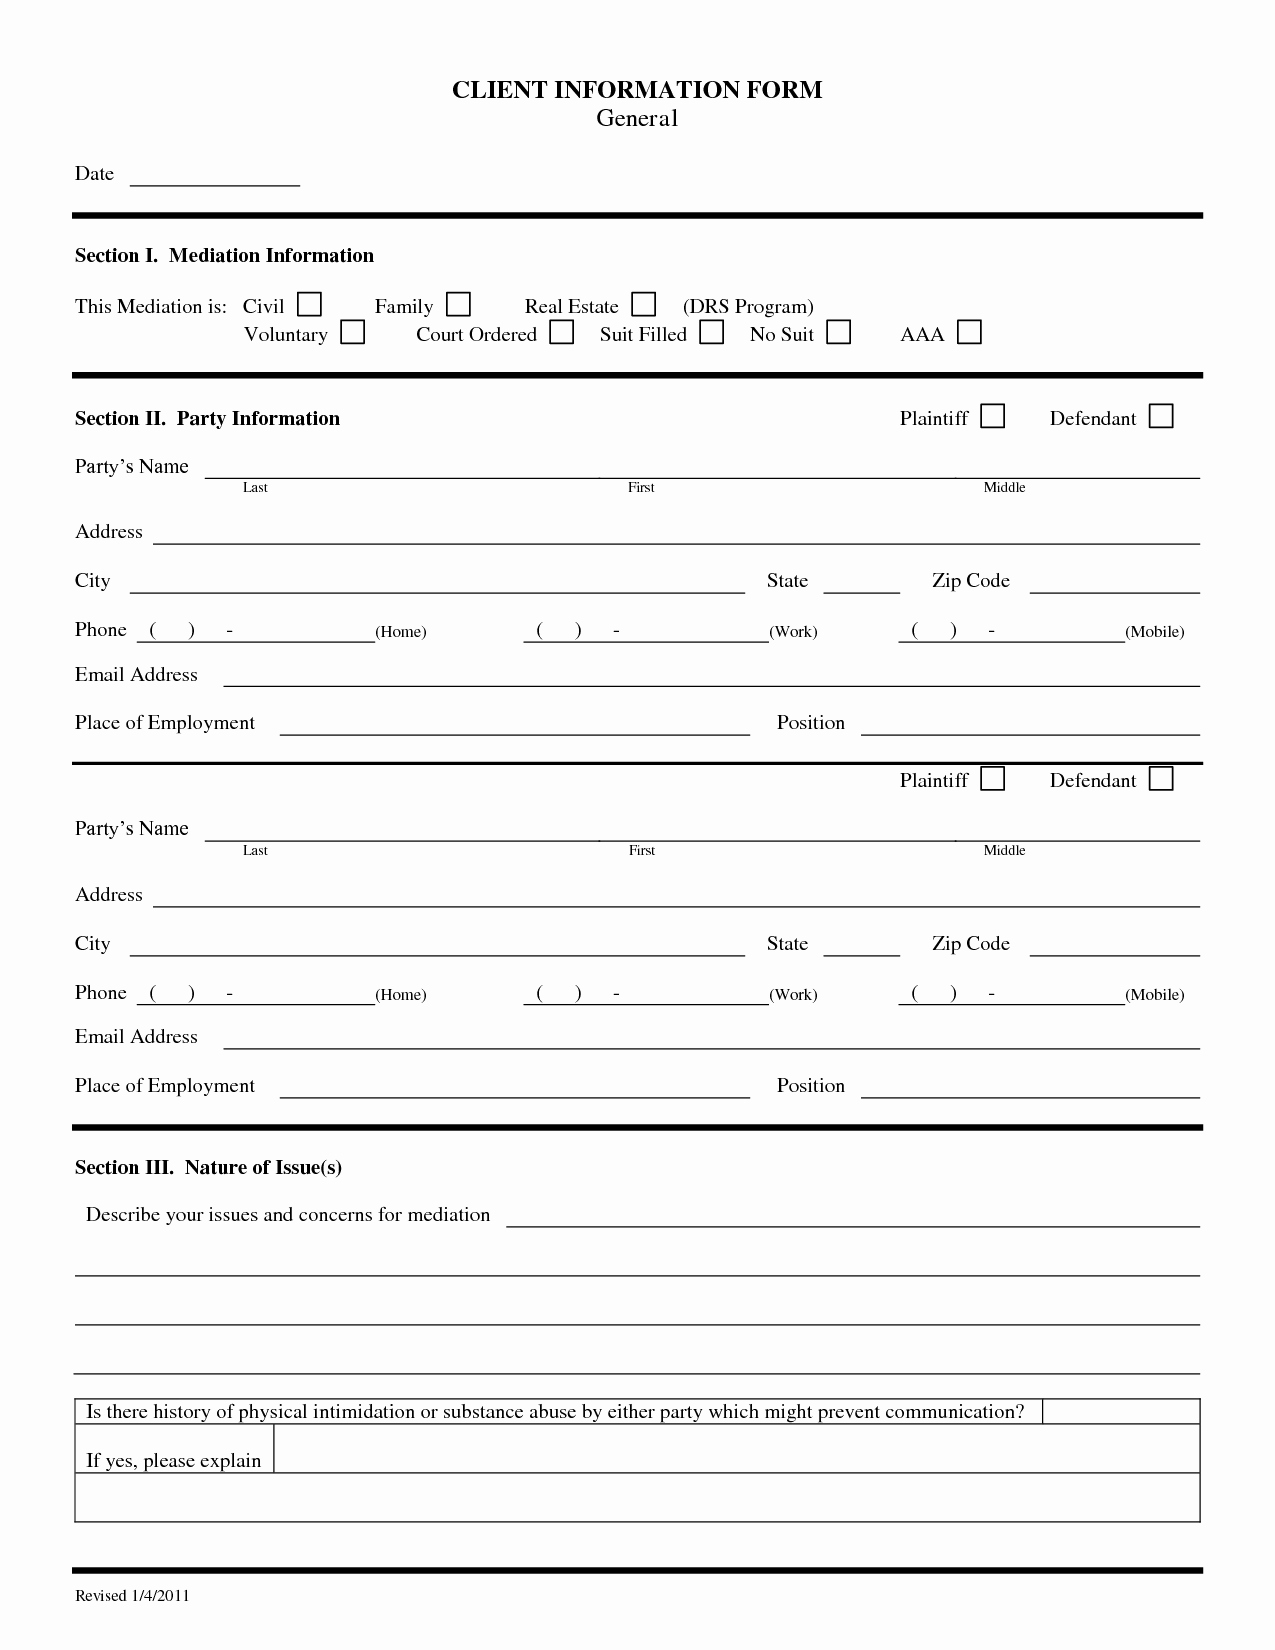 Real Estate New Client Information form Template